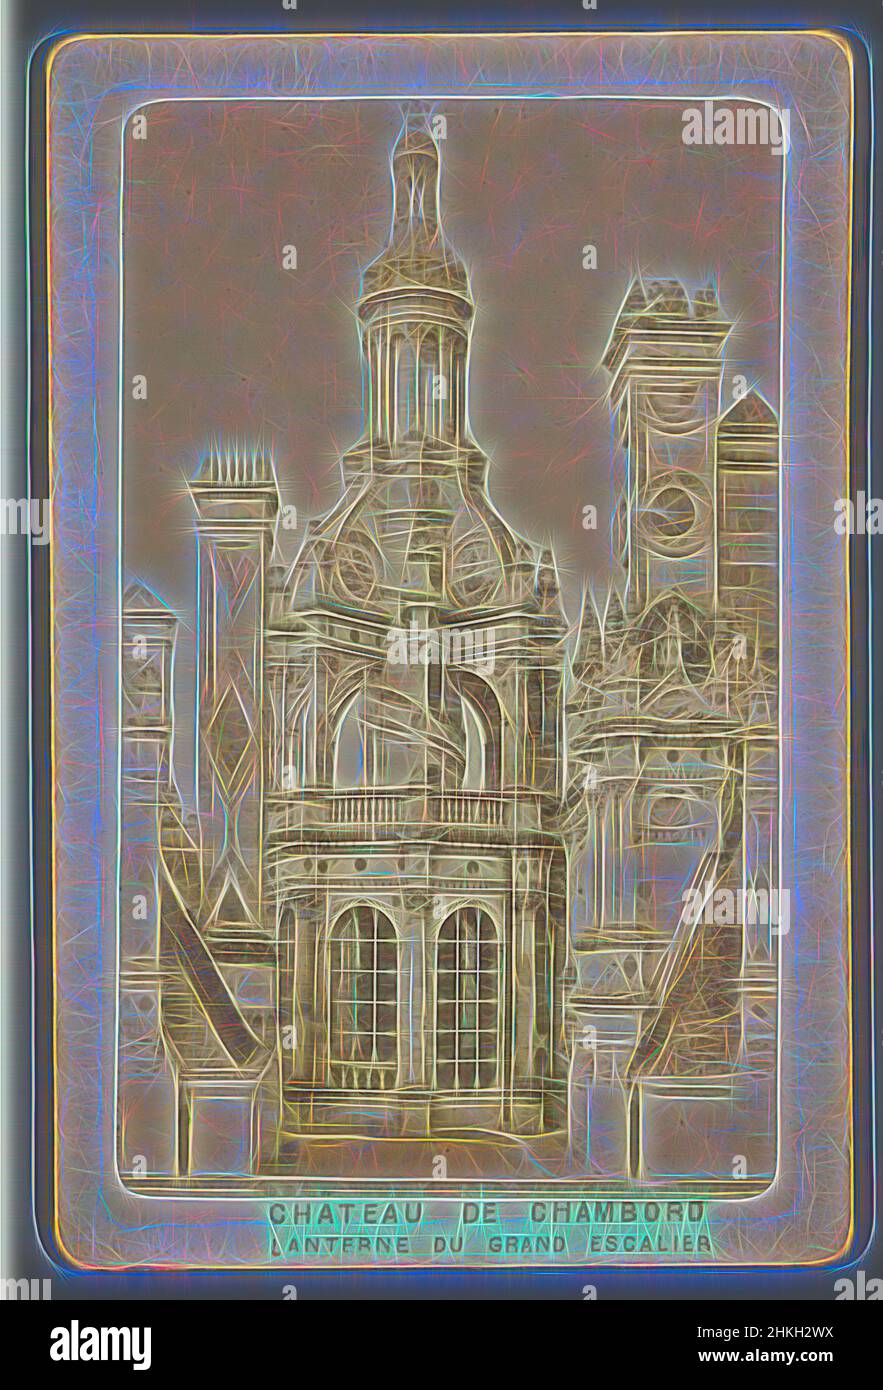 Inspired by Lantern above the double spiral staircase in the castle of Chambord, France, Lanterne du Grand Escalier, Château de Chambord, Chambord, 1855 - 1885, paper, albumen print, height 106 mm × width 69 mm, Reimagined by Artotop. Classic art reinvented with a modern twist. Design of warm cheerful glowing of brightness and light ray radiance. Photography inspired by surrealism and futurism, embracing dynamic energy of modern technology, movement, speed and revolutionize culture Stock Photo